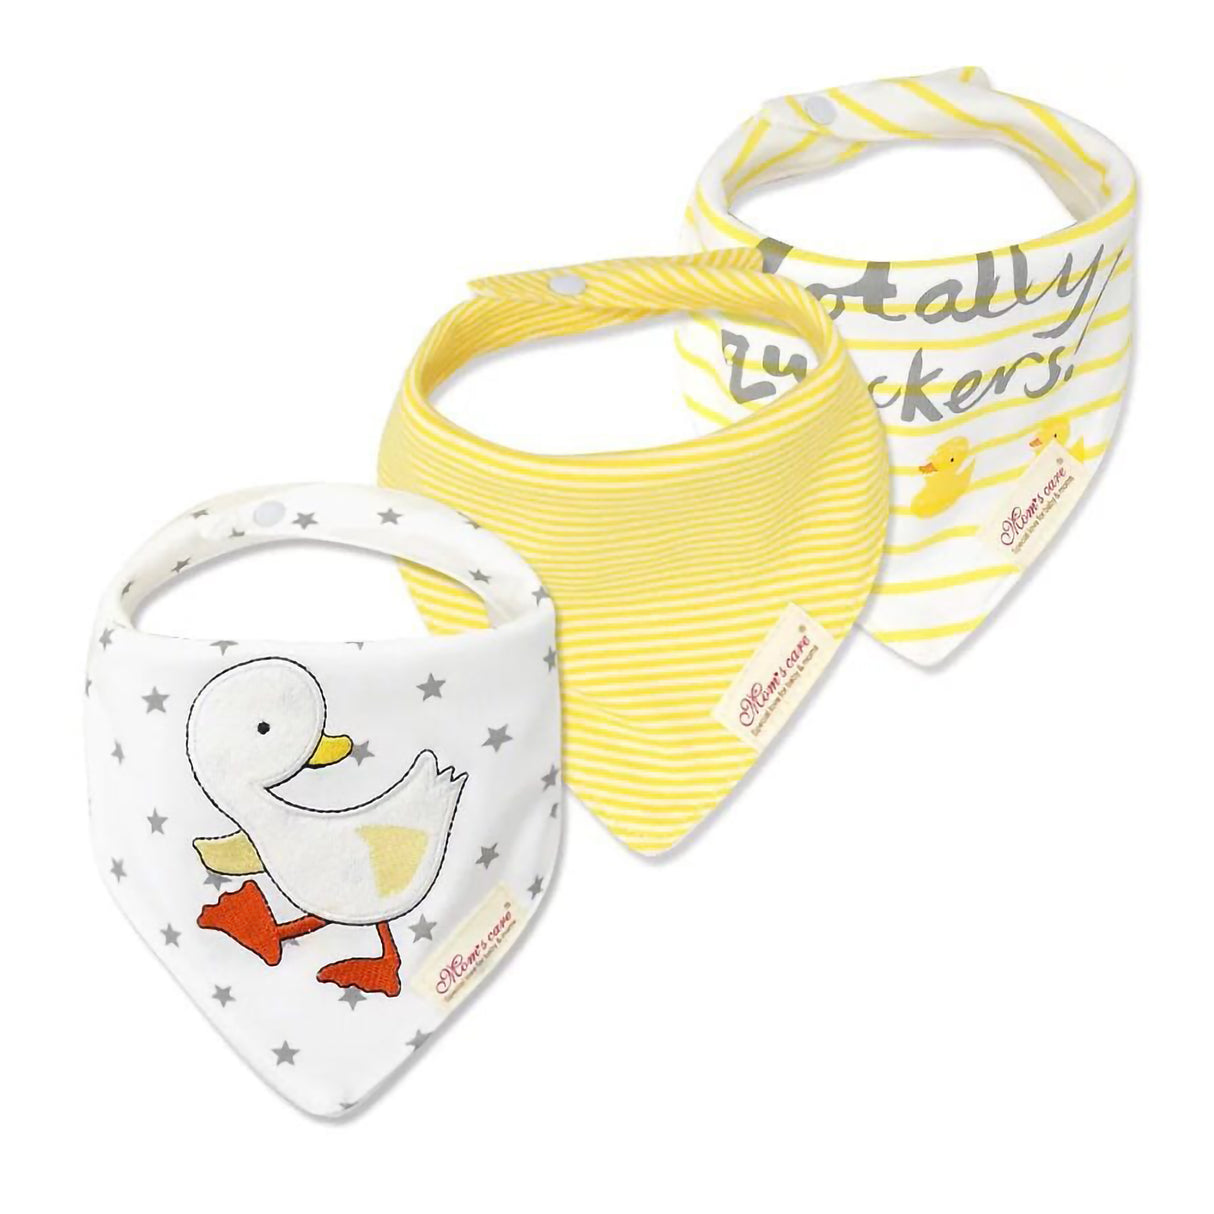 Mom's Care Soft Washable And Reusable Pack Of 3 Cotton Bibs